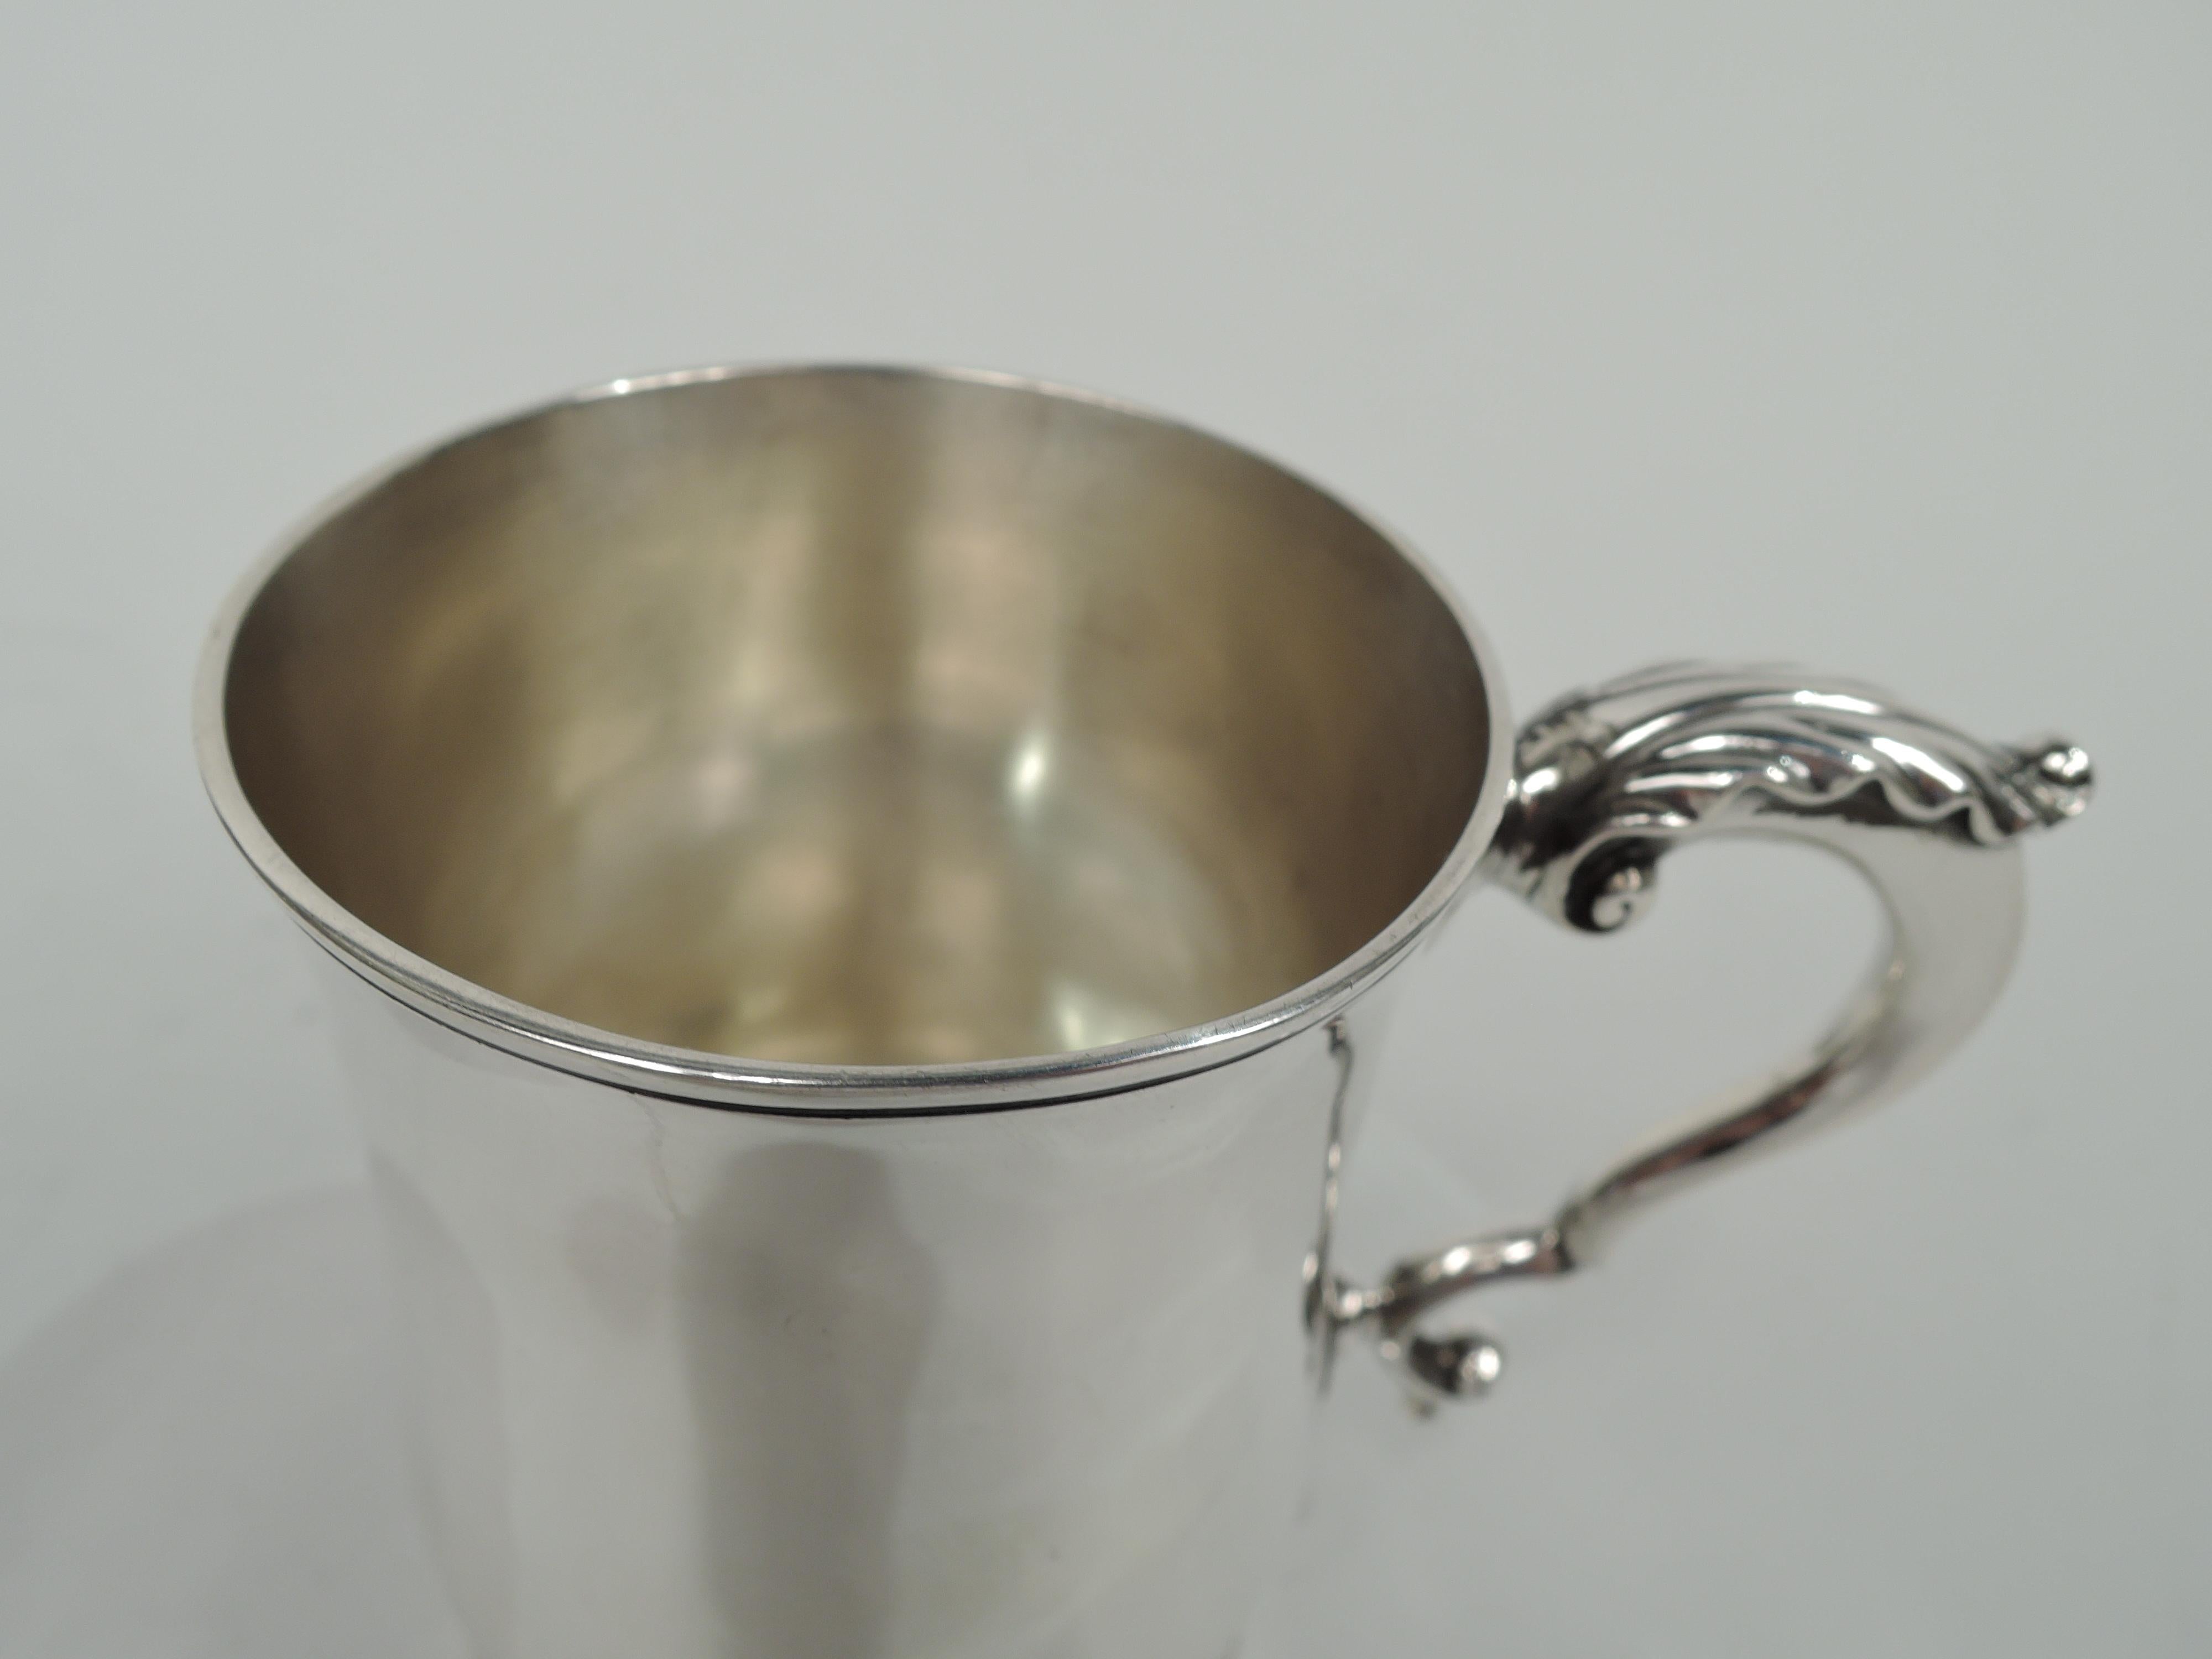 Edwardian sterling silver baby cup. Made by Holland, Adwinckle & Slater in London in 1904. Baluster with leaf-capped double-scroll handle and stepped foot. Traditional form with plenty of room for engraving. Fully marked. Weight: 5 troy ounces.